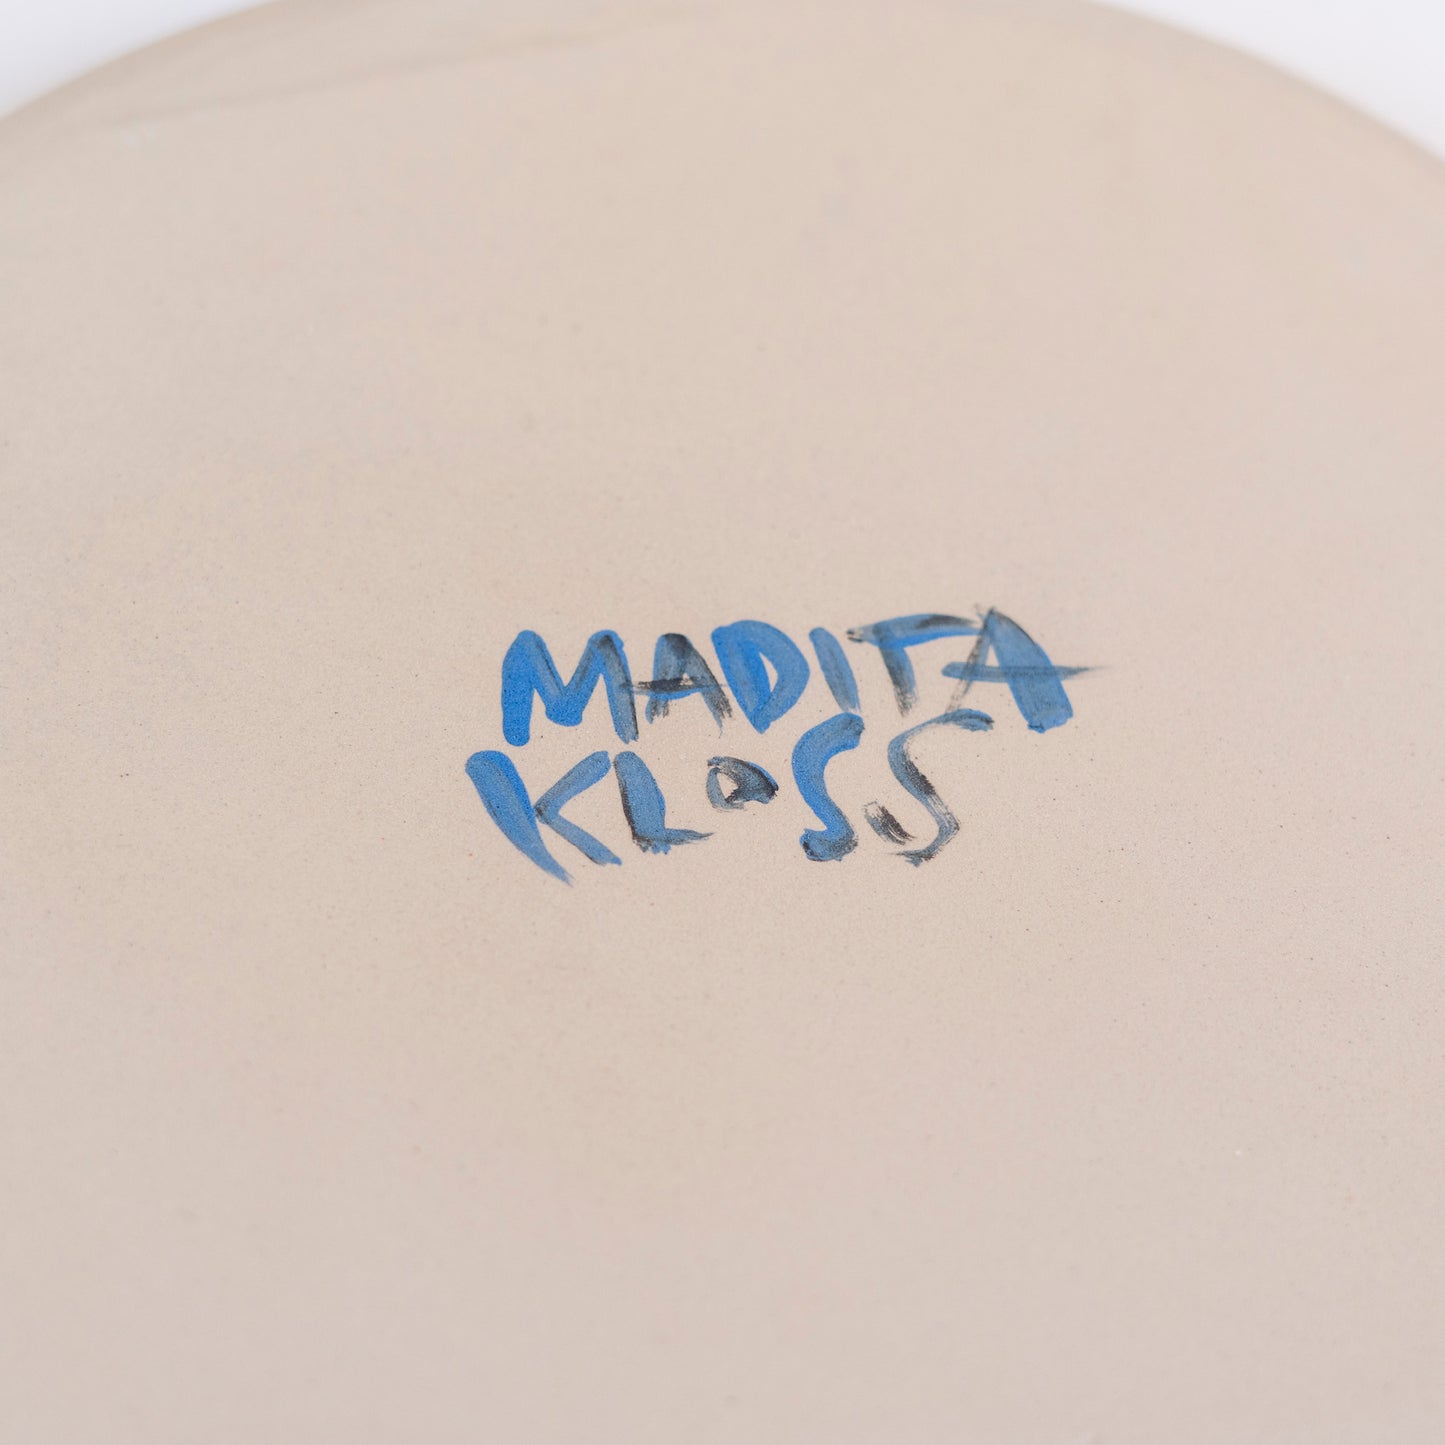 Large plate by Madita Kloss